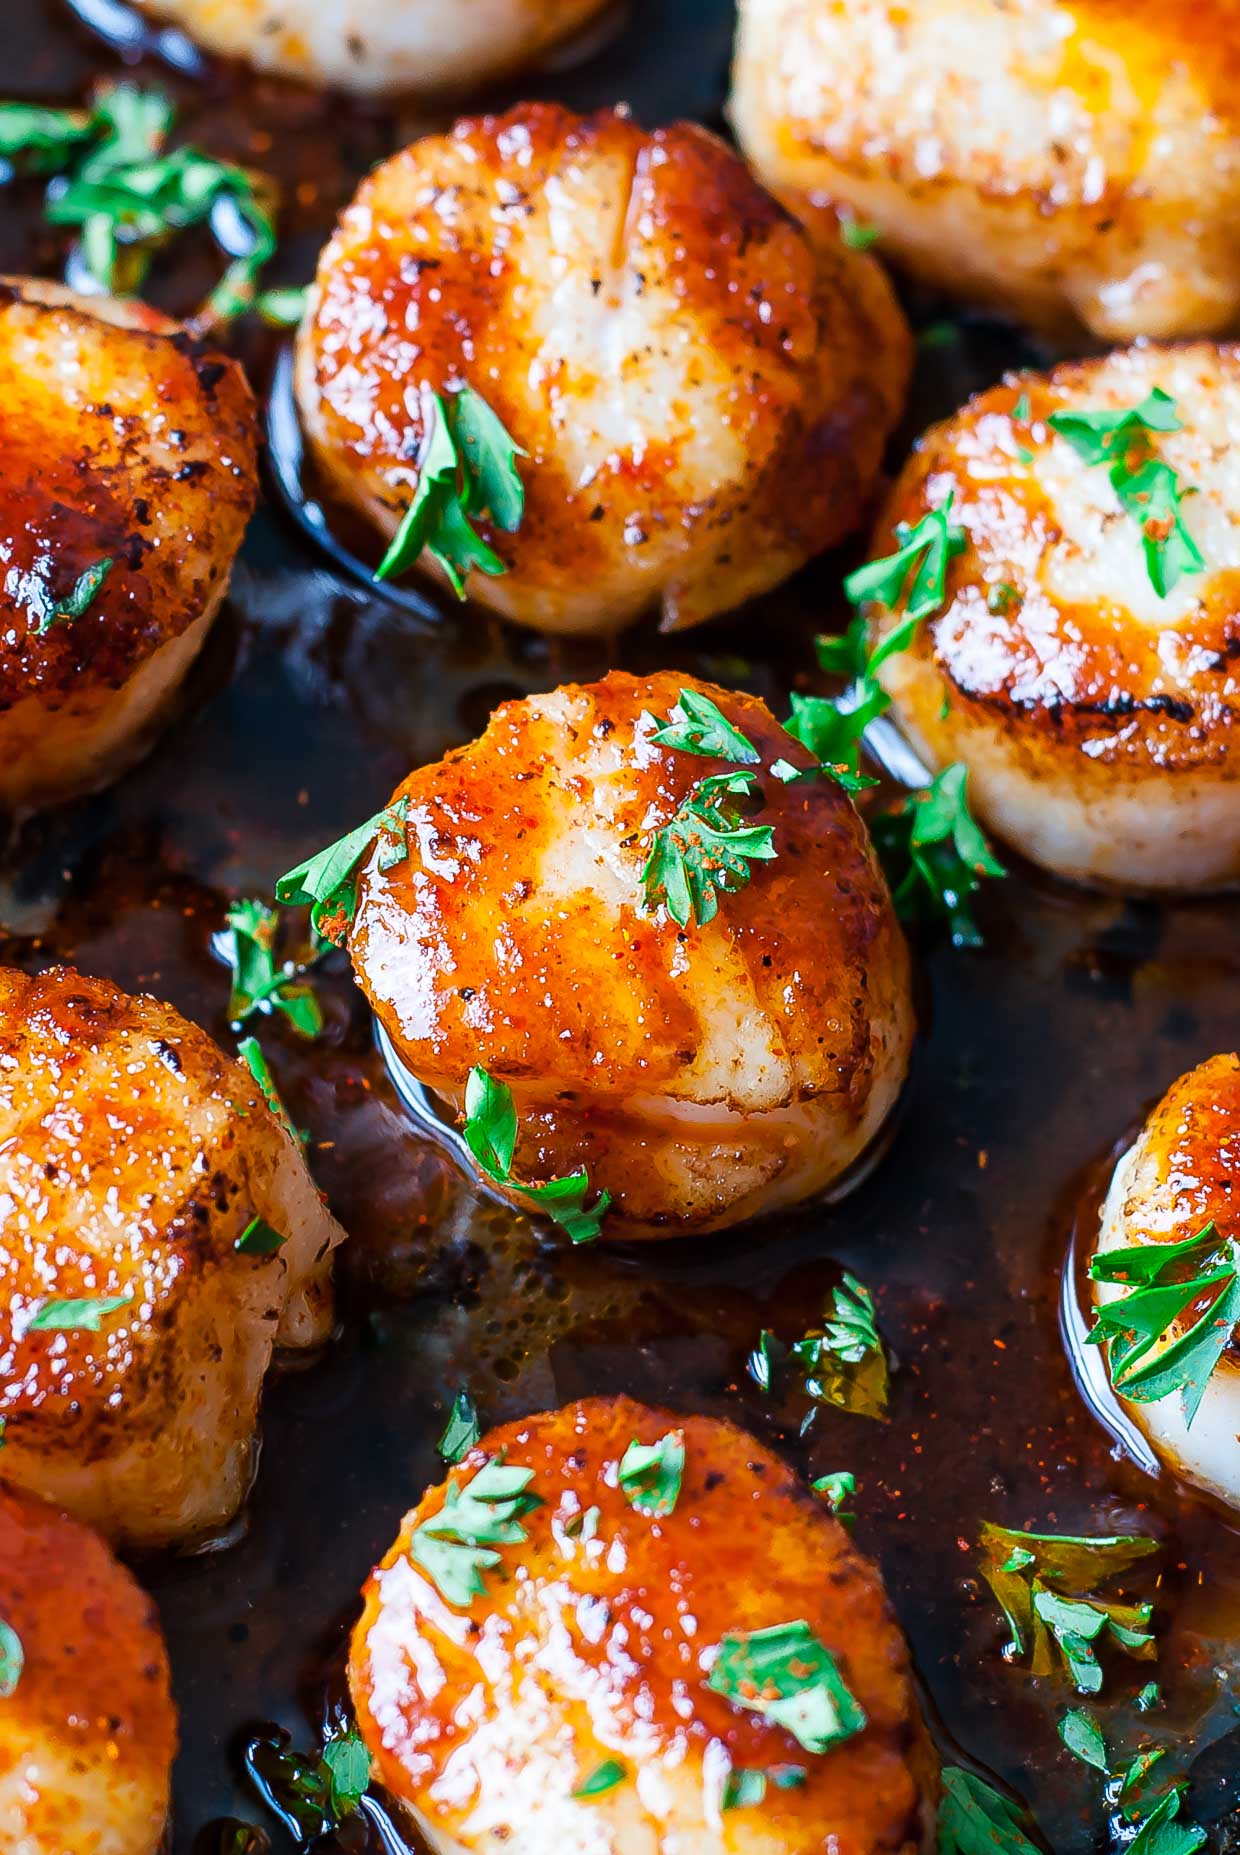 These quick and easy Sriracha Glazed Seared Scallops are finished off with a spicy + super flavorful homemade Sriracha pan sauce! Delicious!